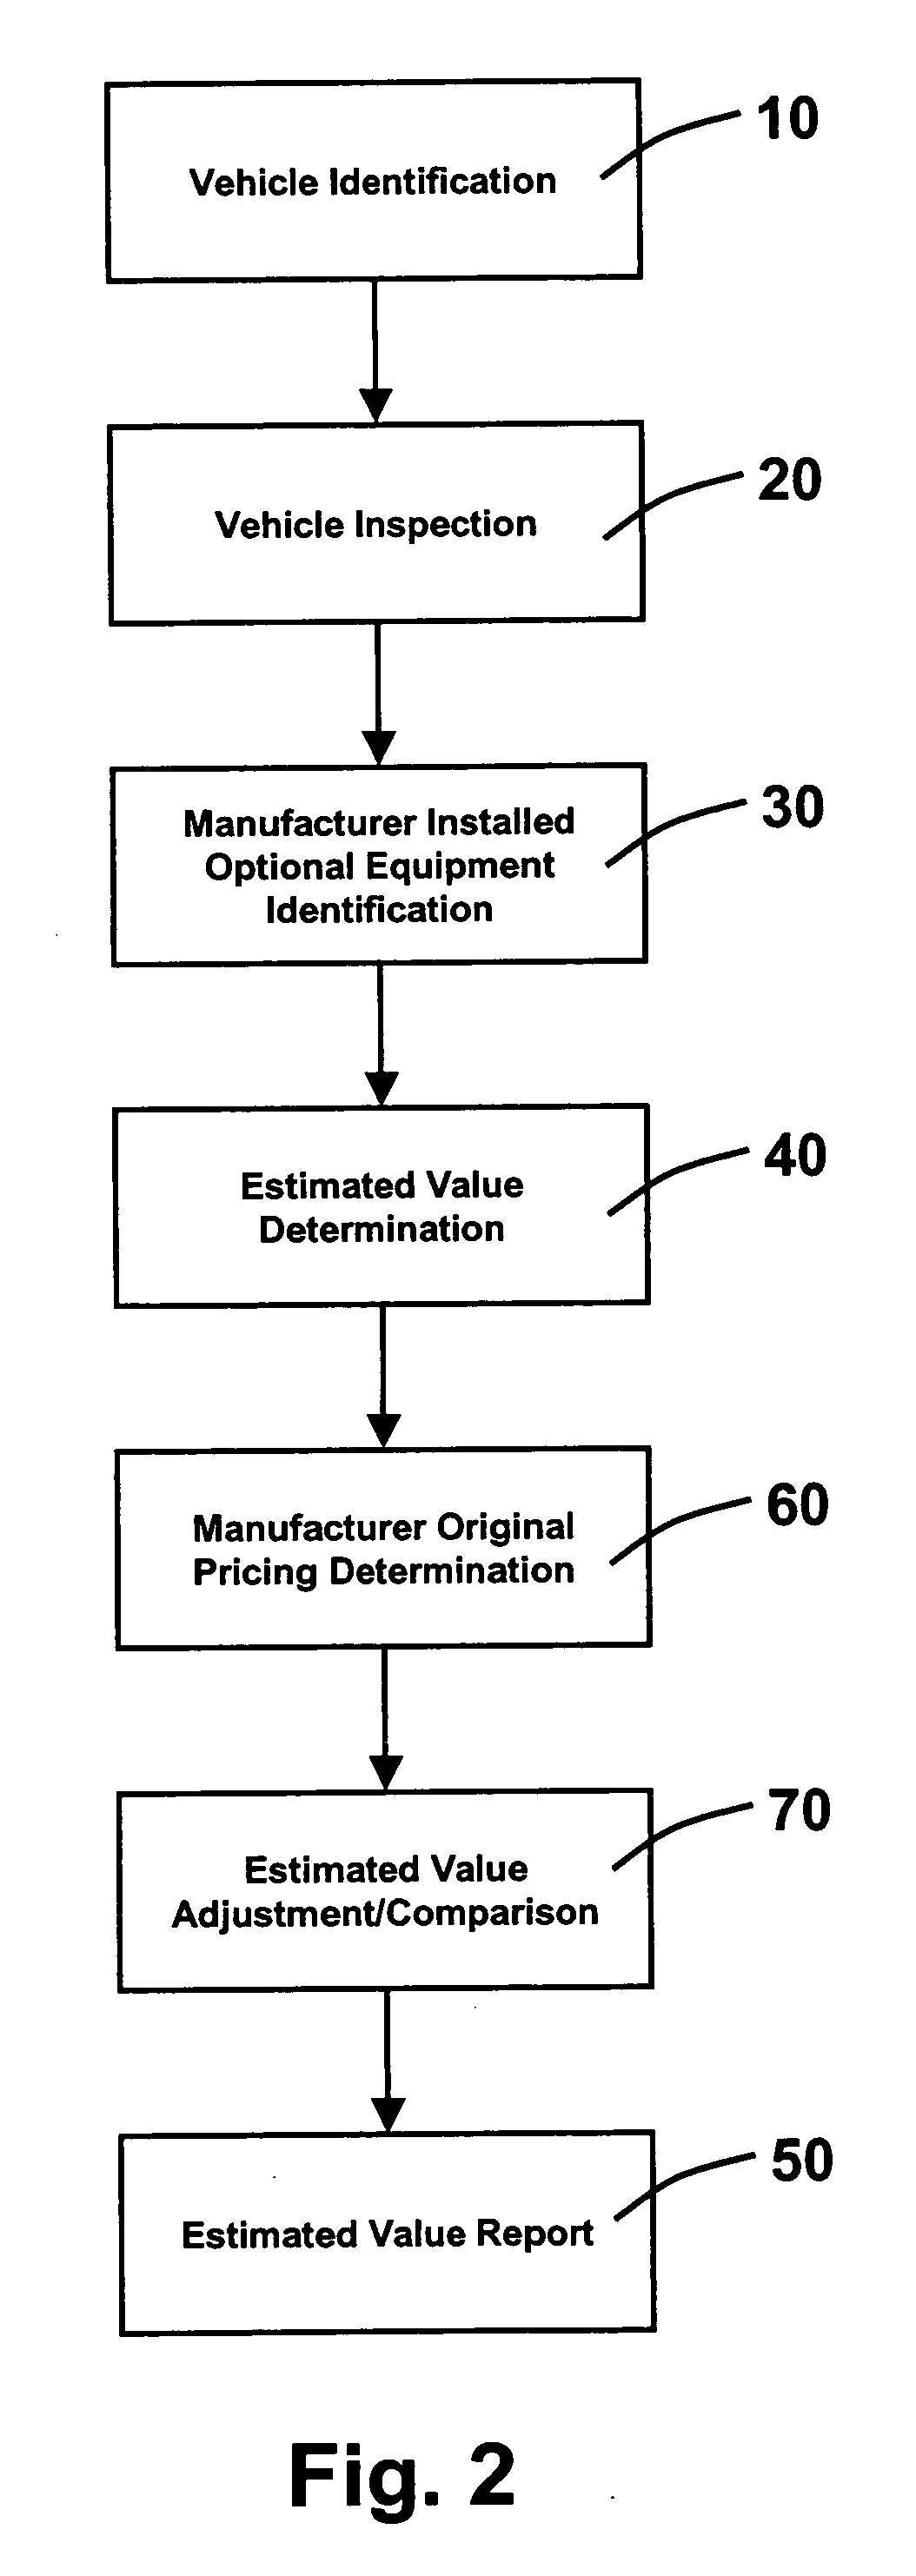 Method for valuing used motor vehicles